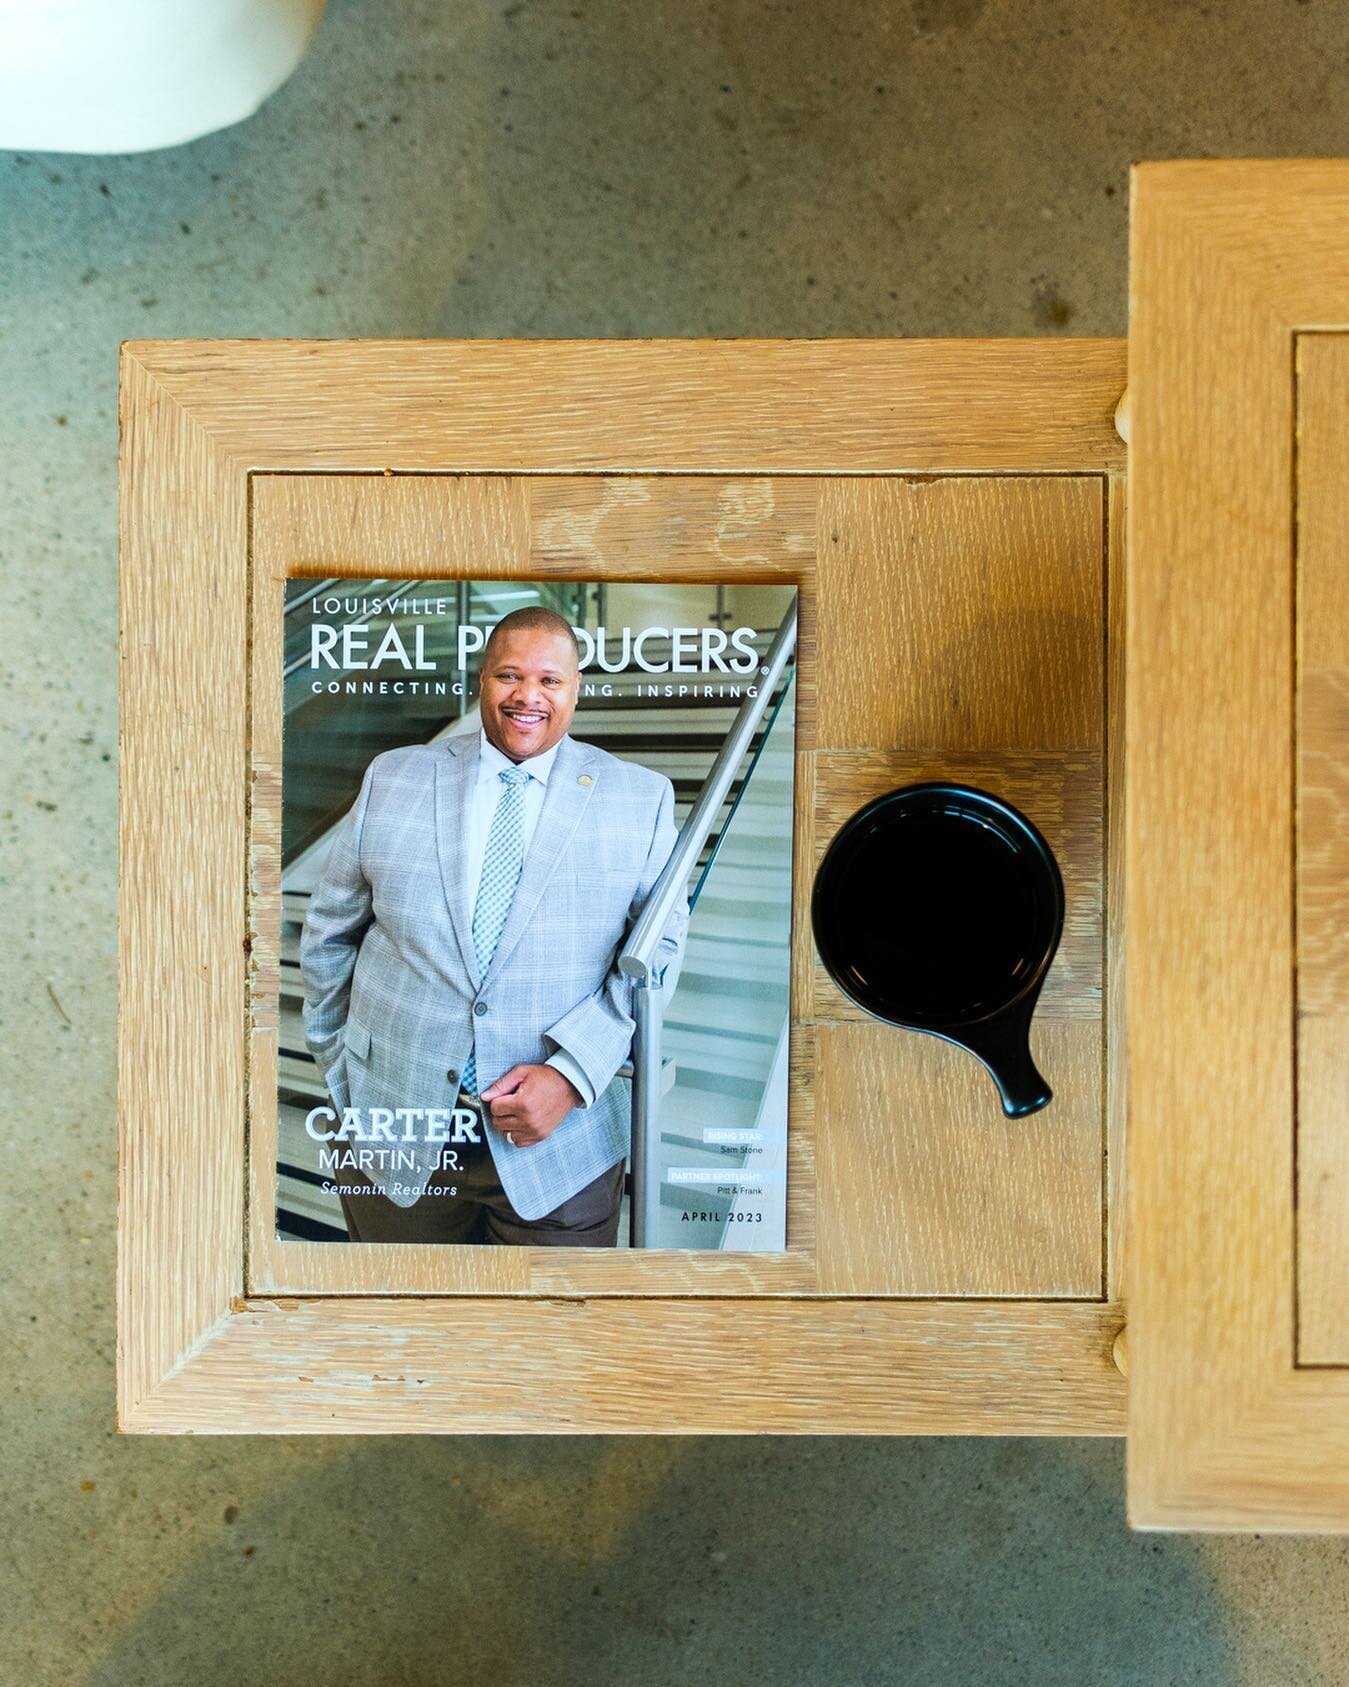 And just like that, another issue of @louisville_realproducers is out in the wild! Congrats to @carter_martin_jr_realtor for the cover, @louisvillekyrealestate for the rising star feature and also to our industry partners over at @pitt.and.frank for 